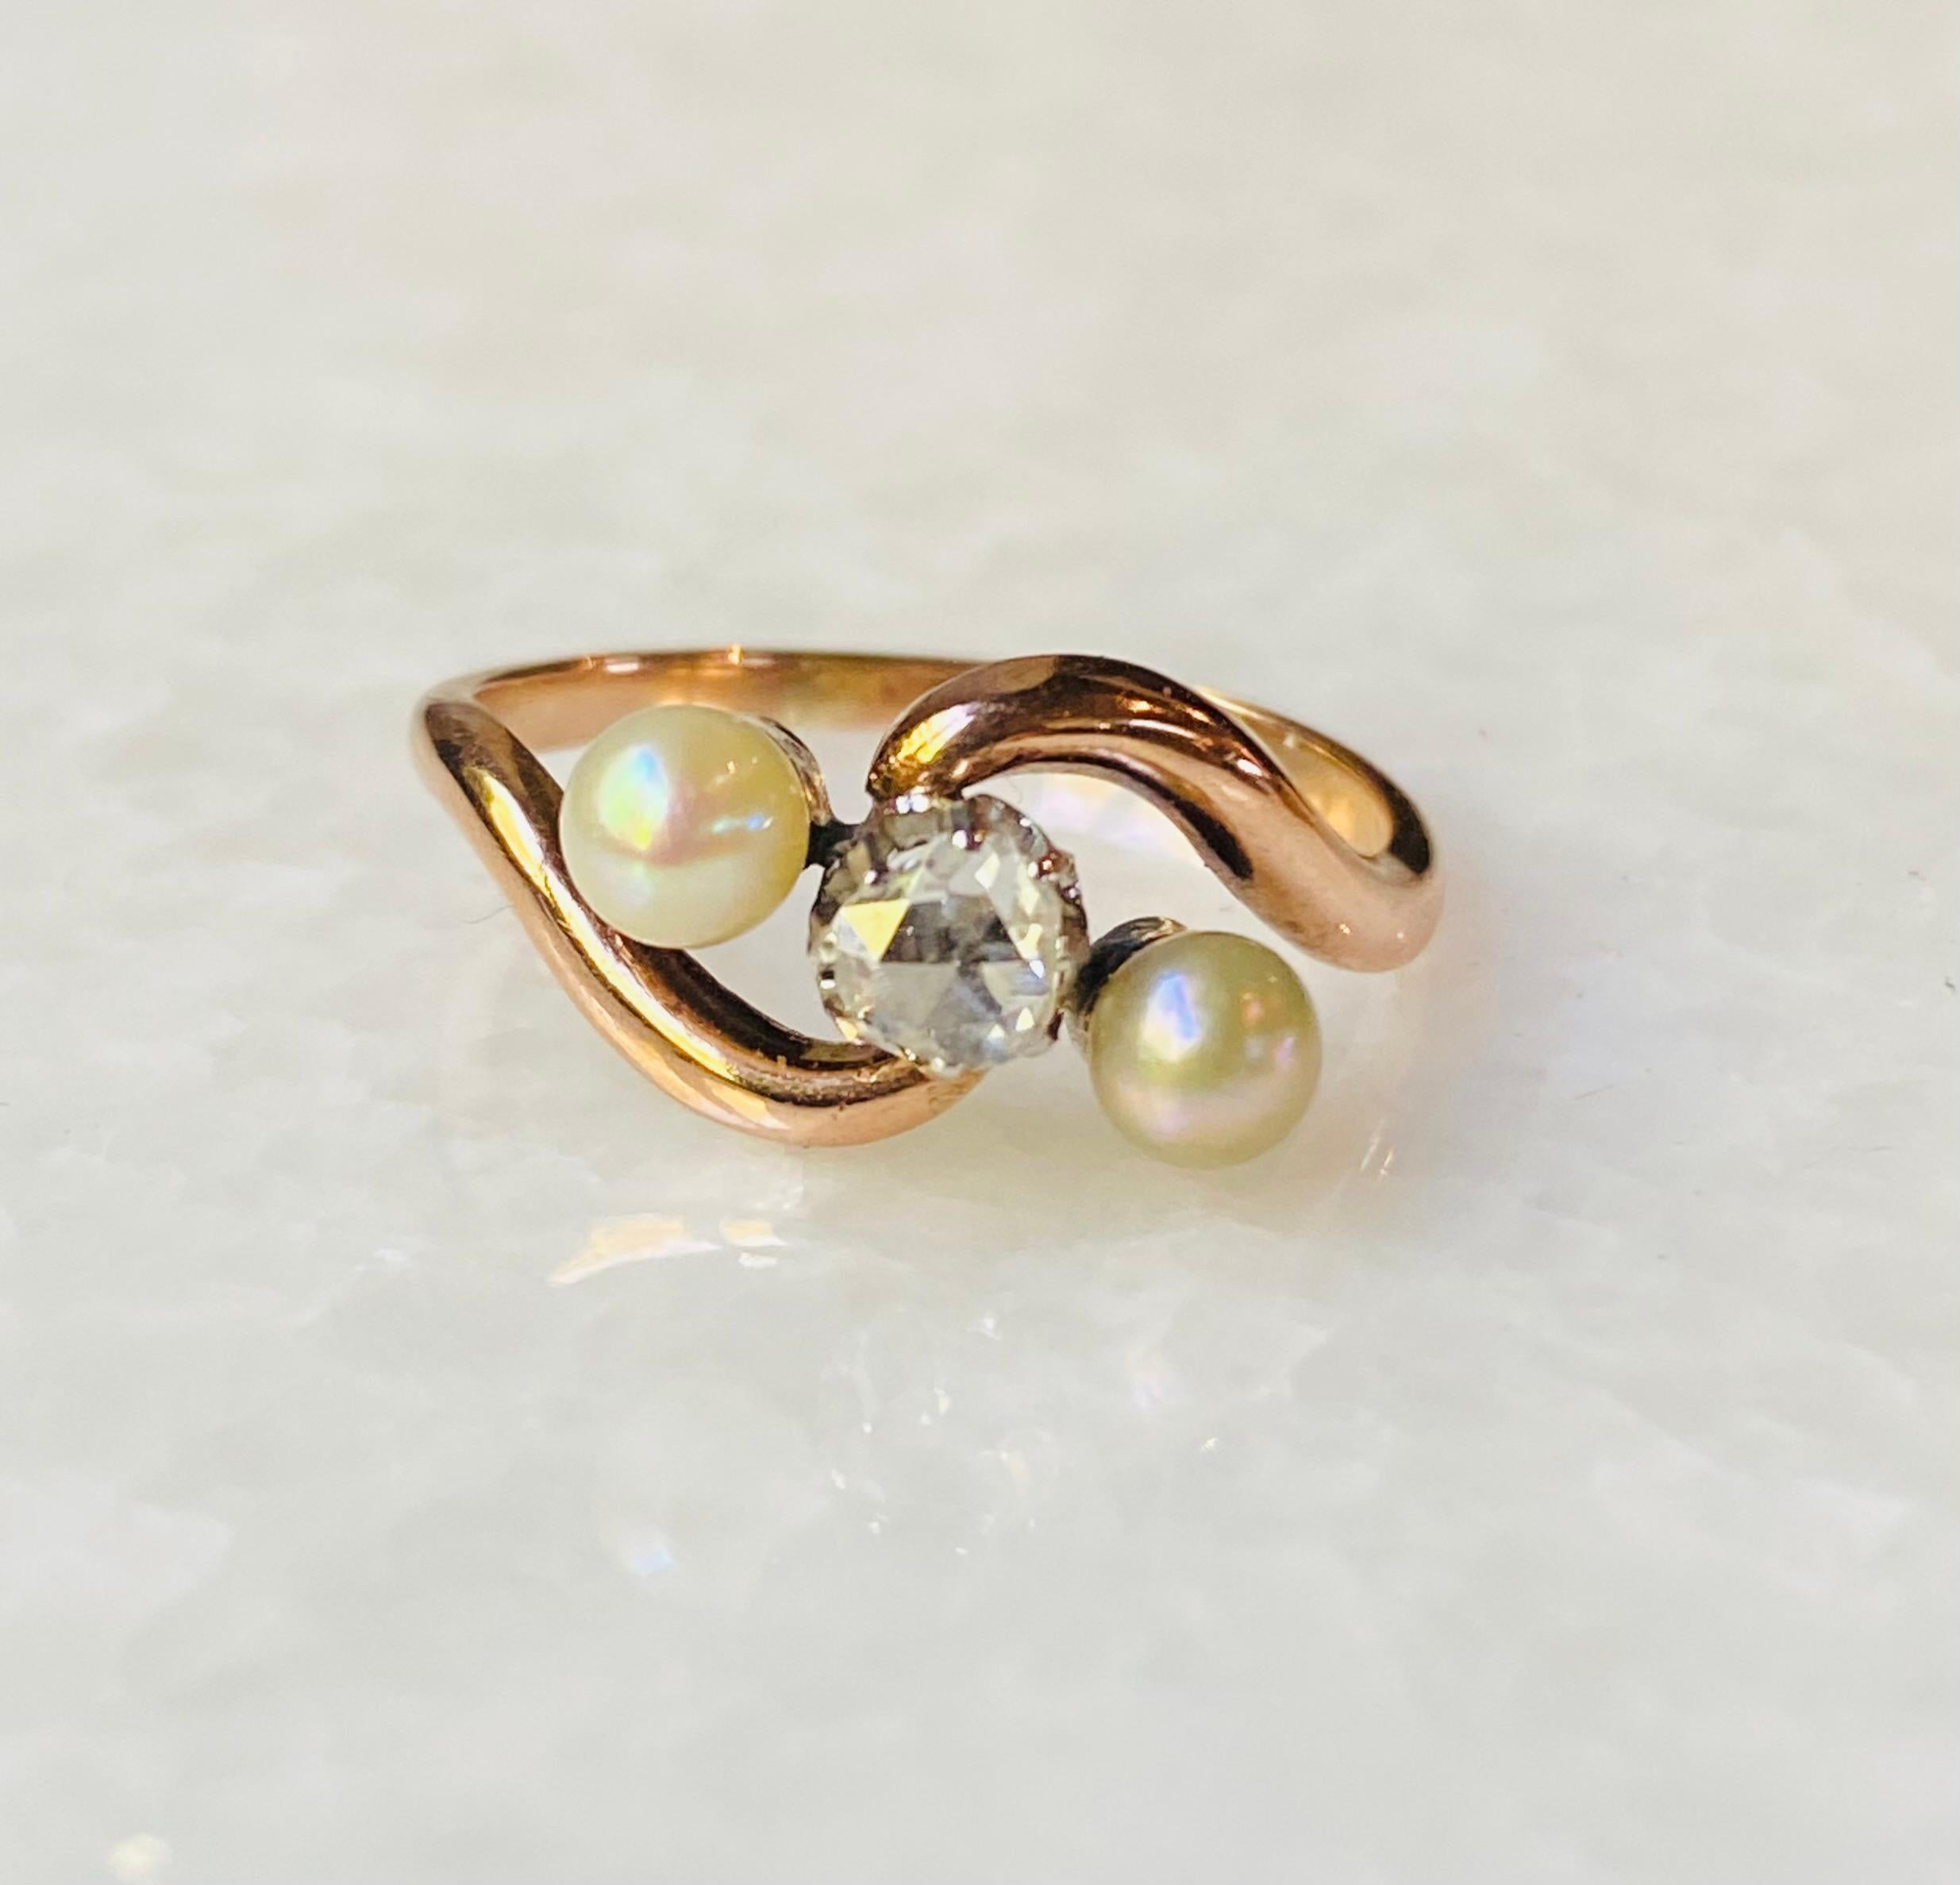 Antique Cross over Ring with High Quality Natural Diamond and Two Pearls.

Gorgeous and timeless antique crossover ring with high quality natural diamond and two pearls. This antique ring from the 1900S, is set with one high quality rose cut